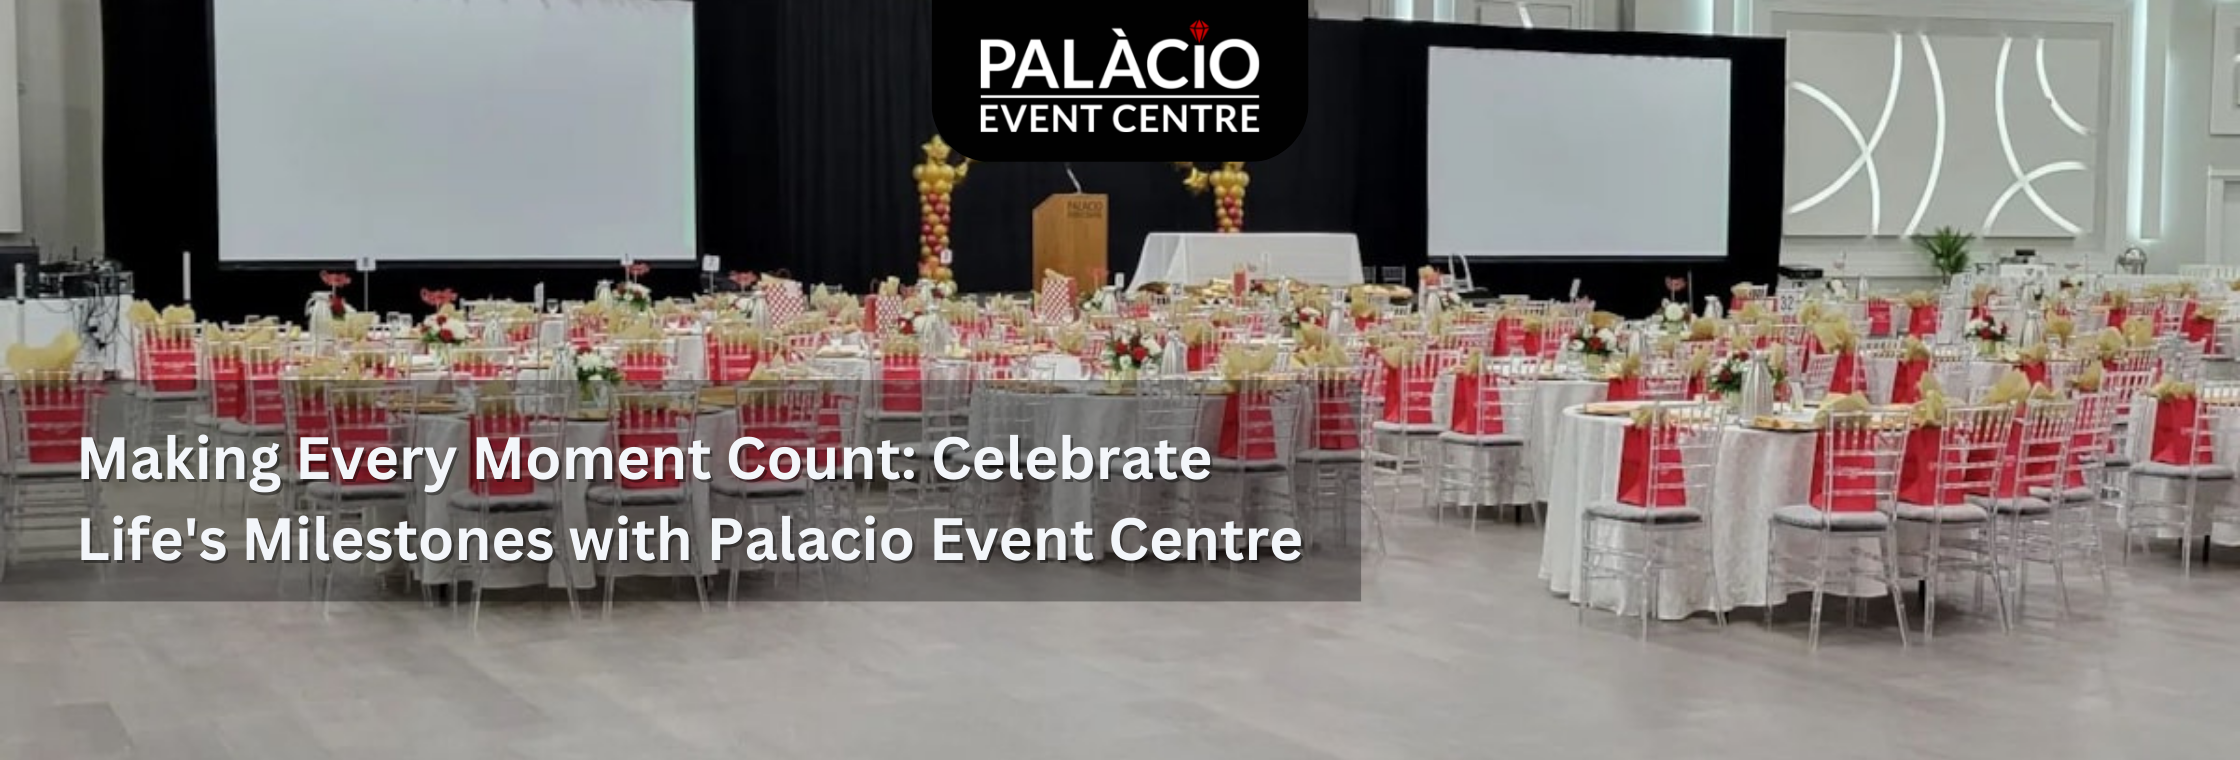 Making Every Moment Count: Celebrate Life's Milestones with Palacio Event Centre